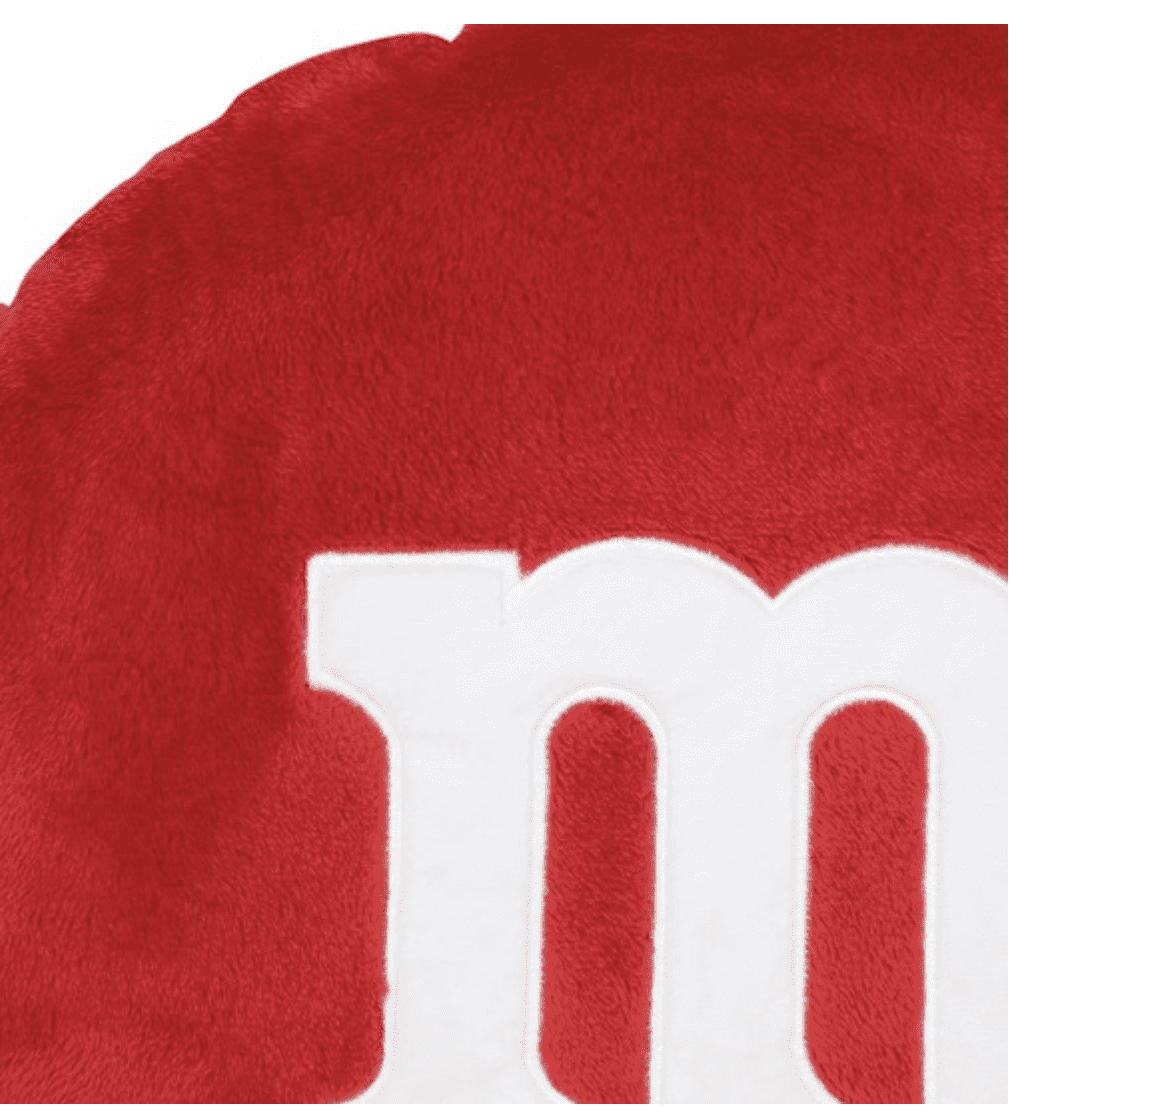 M&M'S, Red Verbiage Pillow, Square